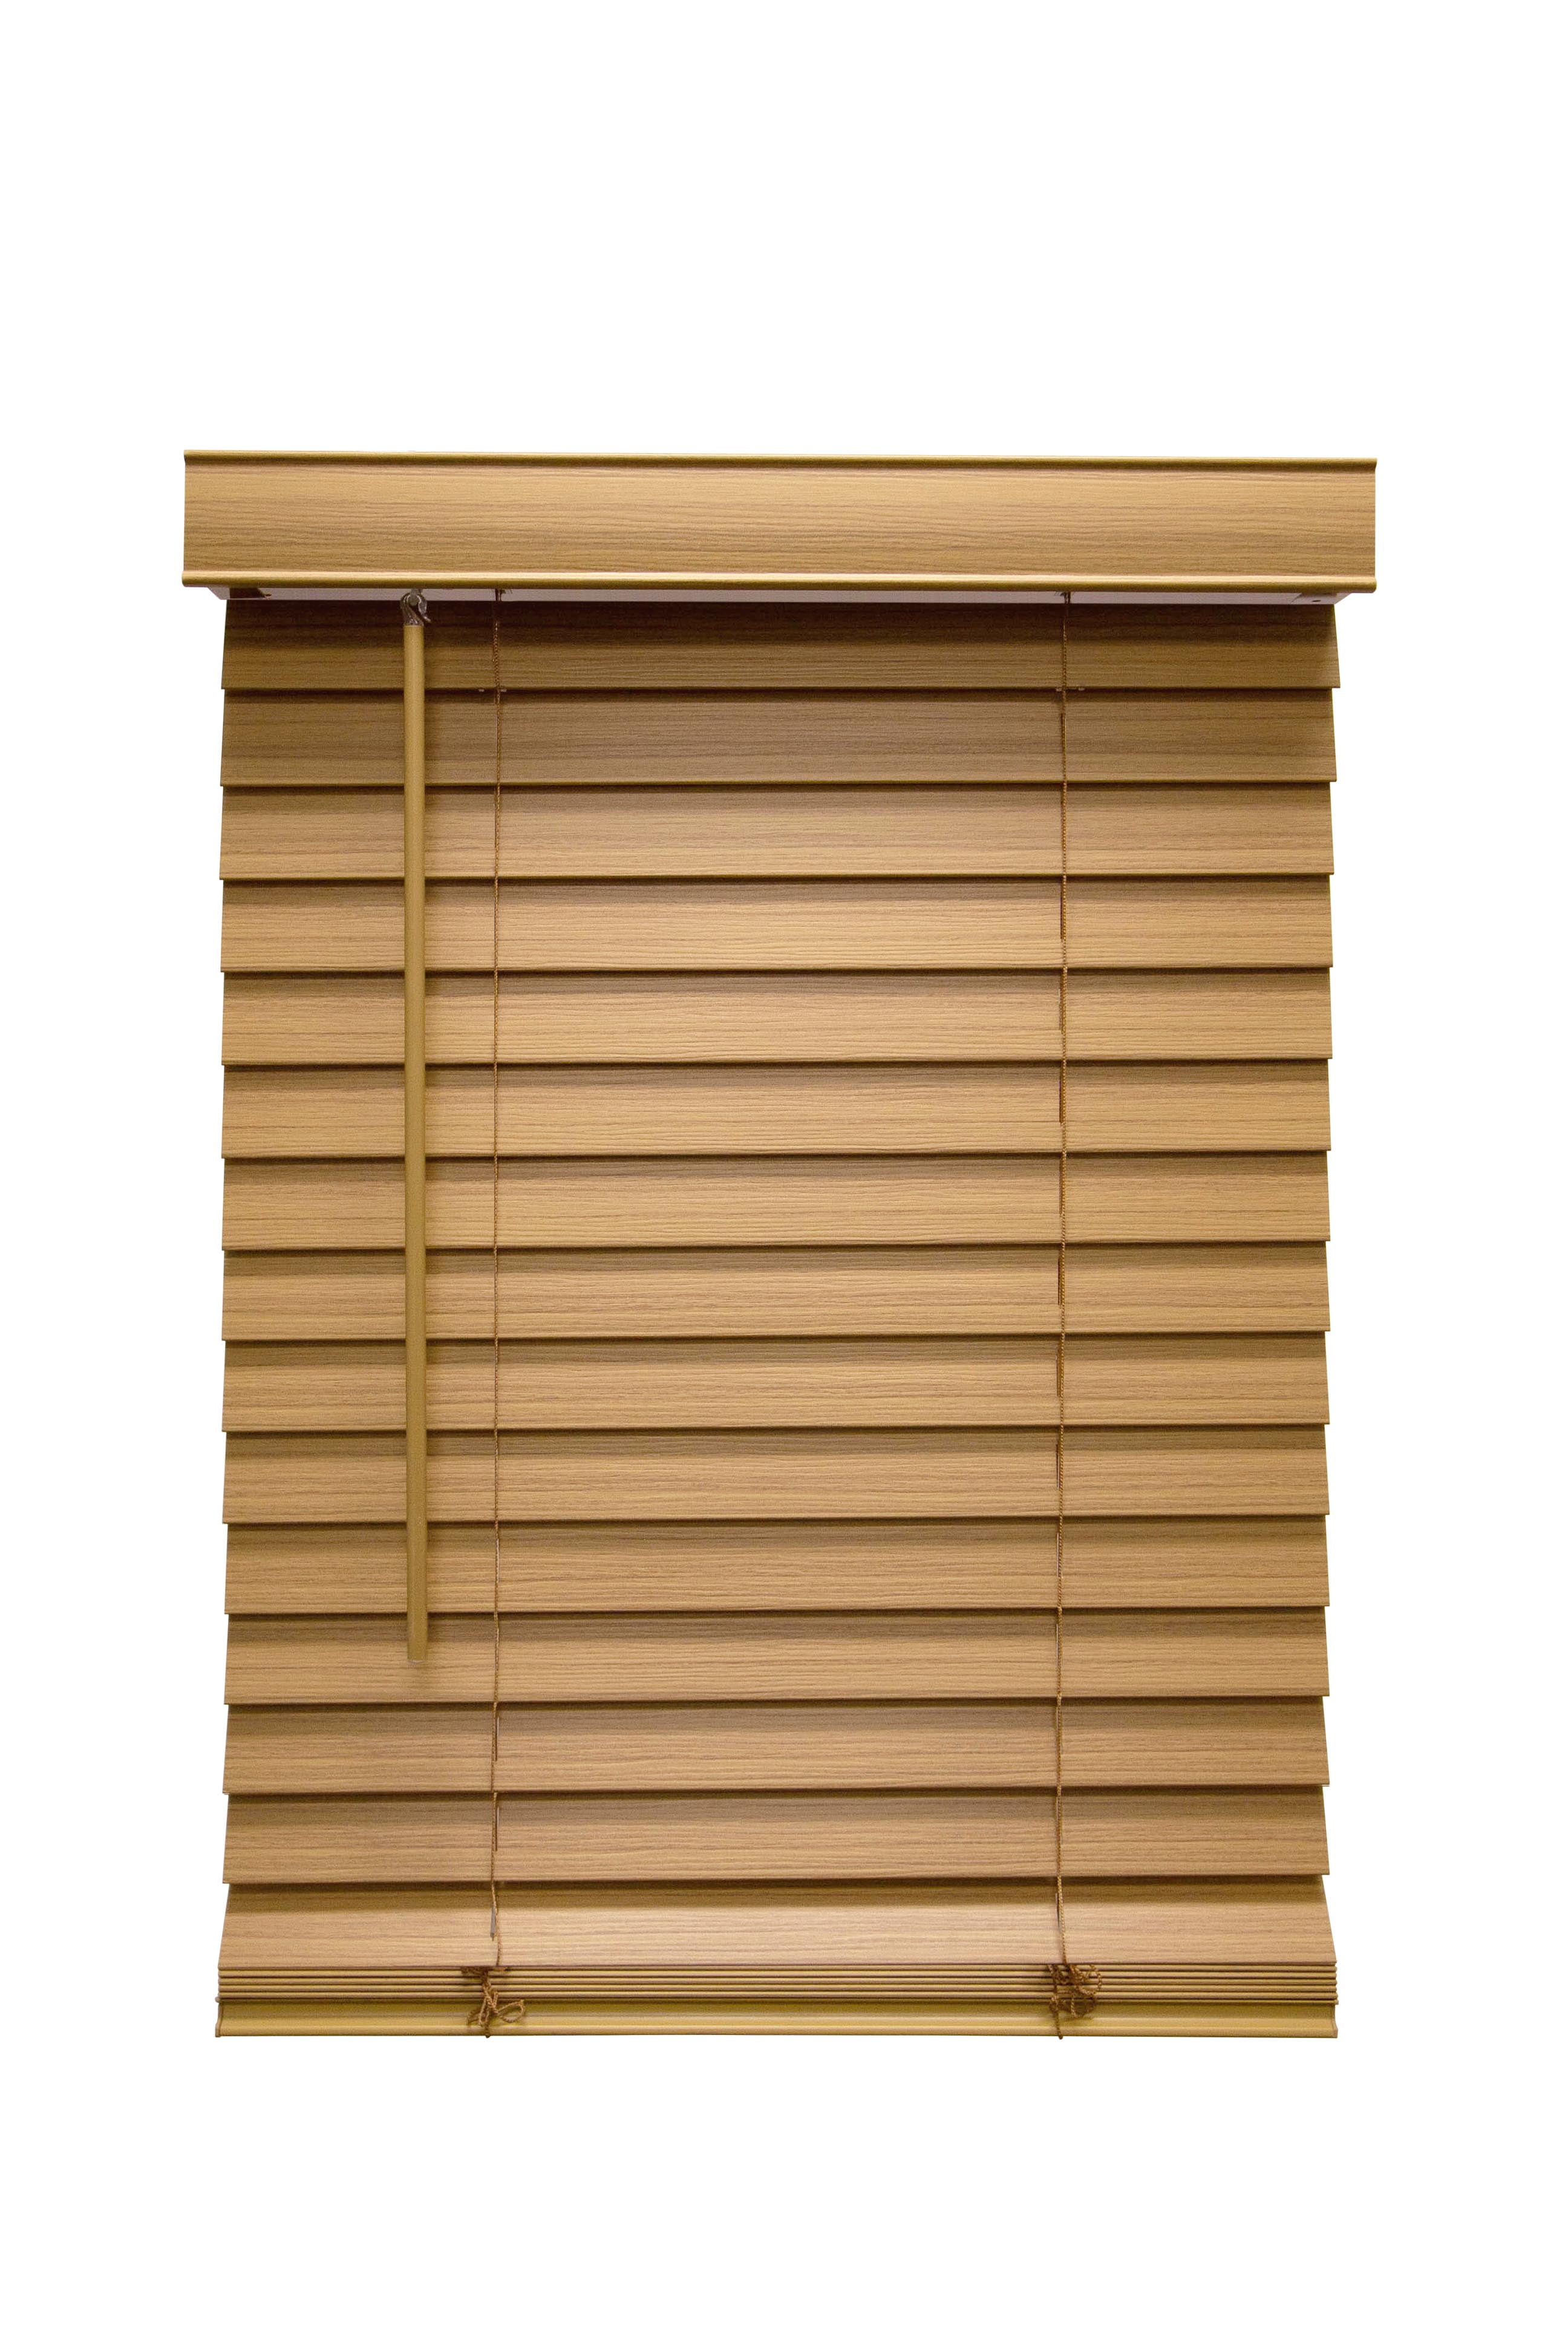 AVAILABLE IN WIDTHS 45 CM TO 210 CM ALSO AVAILABLE IN DARK OAK BLACK and NATURAL COLOURS* 135 x STANDARD EASYFIT TEAK Wood Effect Venetian blind 